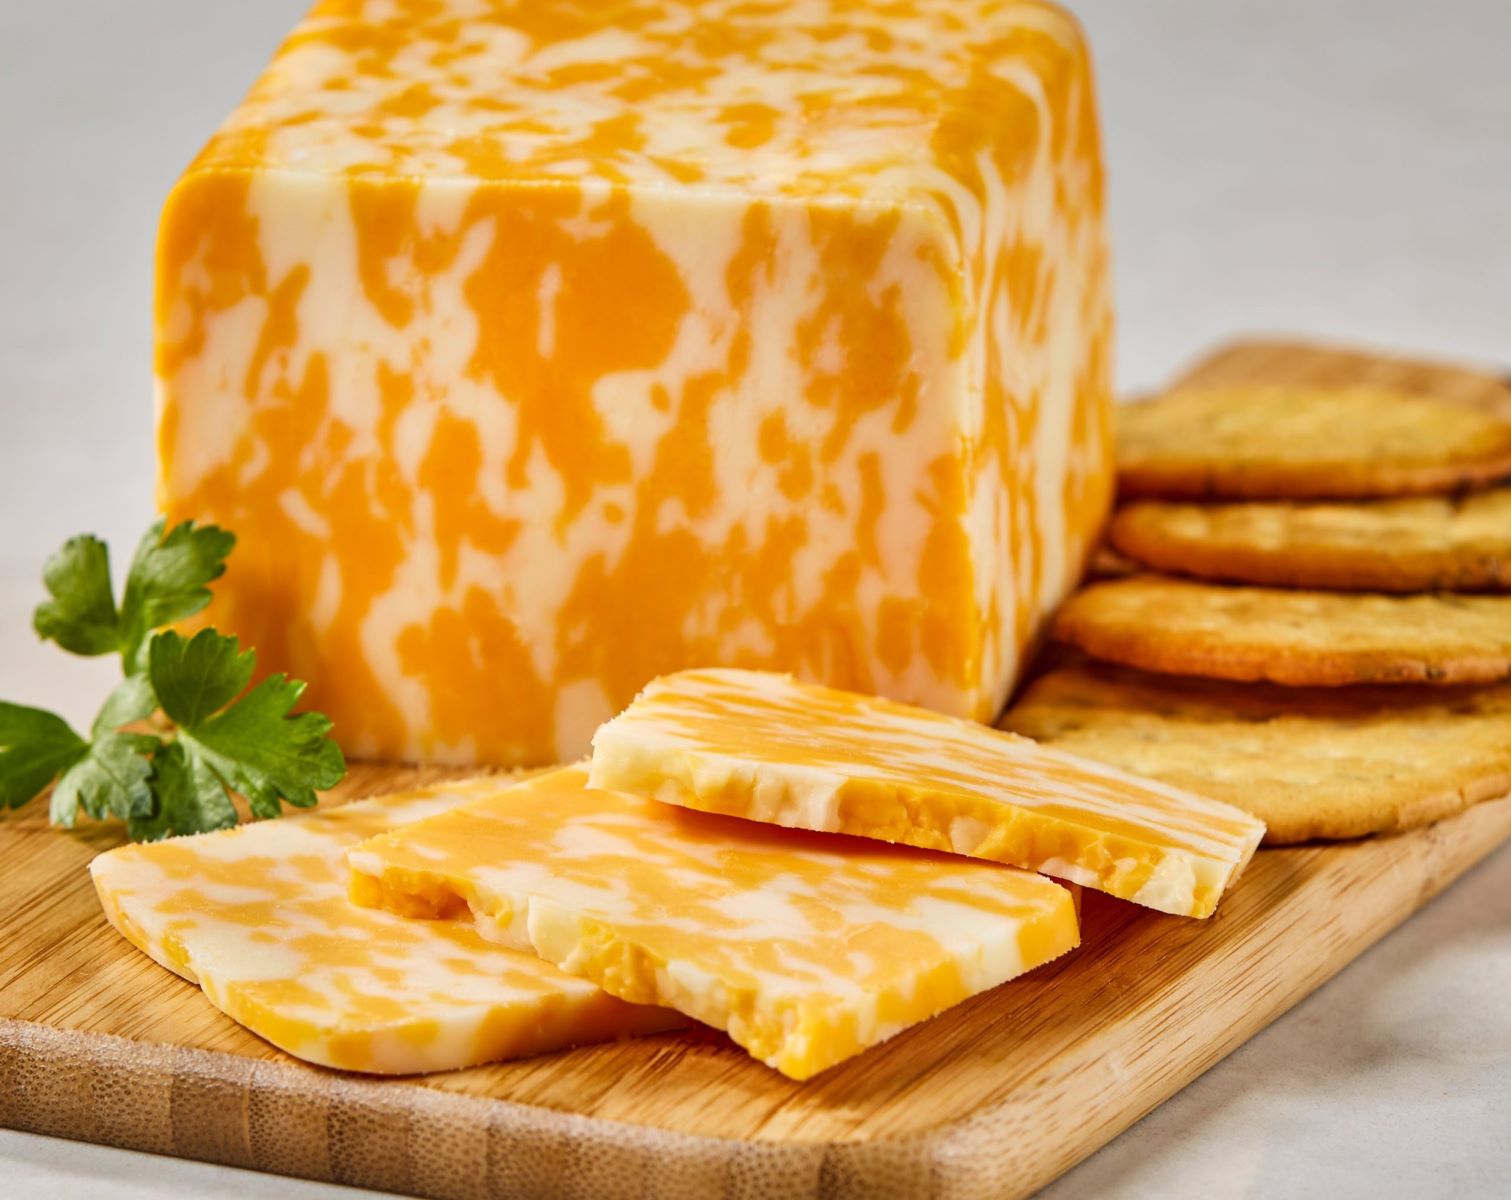 20-colby-jack-cheese-nutrition-facts